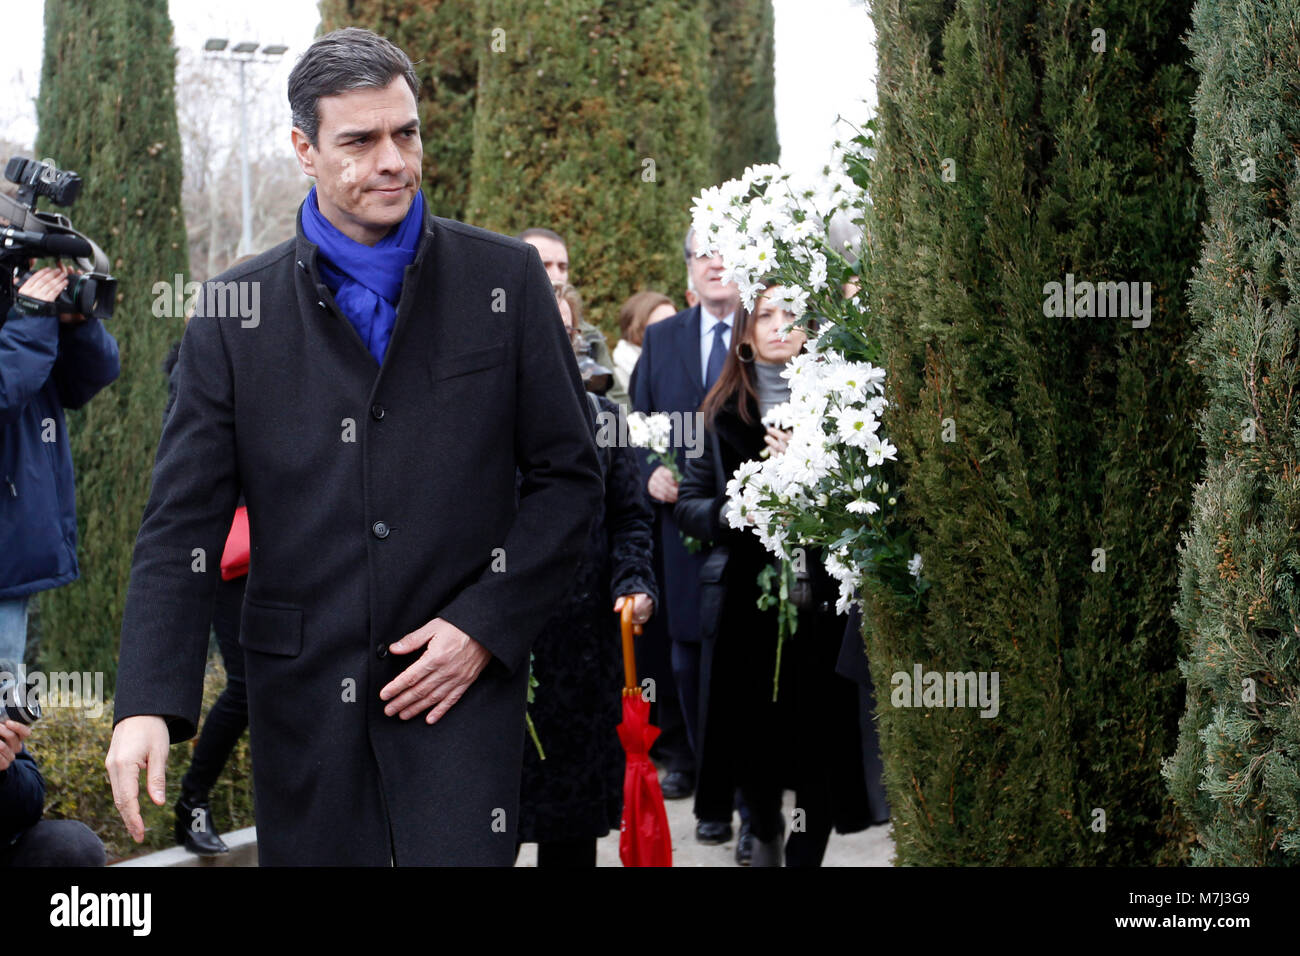 Madrid, Spain. 11th March, 2018.Pedro Sanchez during a tribute in memory of the victims of the attack of 11-M 2004, at the forest of the Retiro Park on Sunday 11 March 2018. Credit: Gtres Información más Comuniación on line, S.L./Alamy Live News Stock Photo